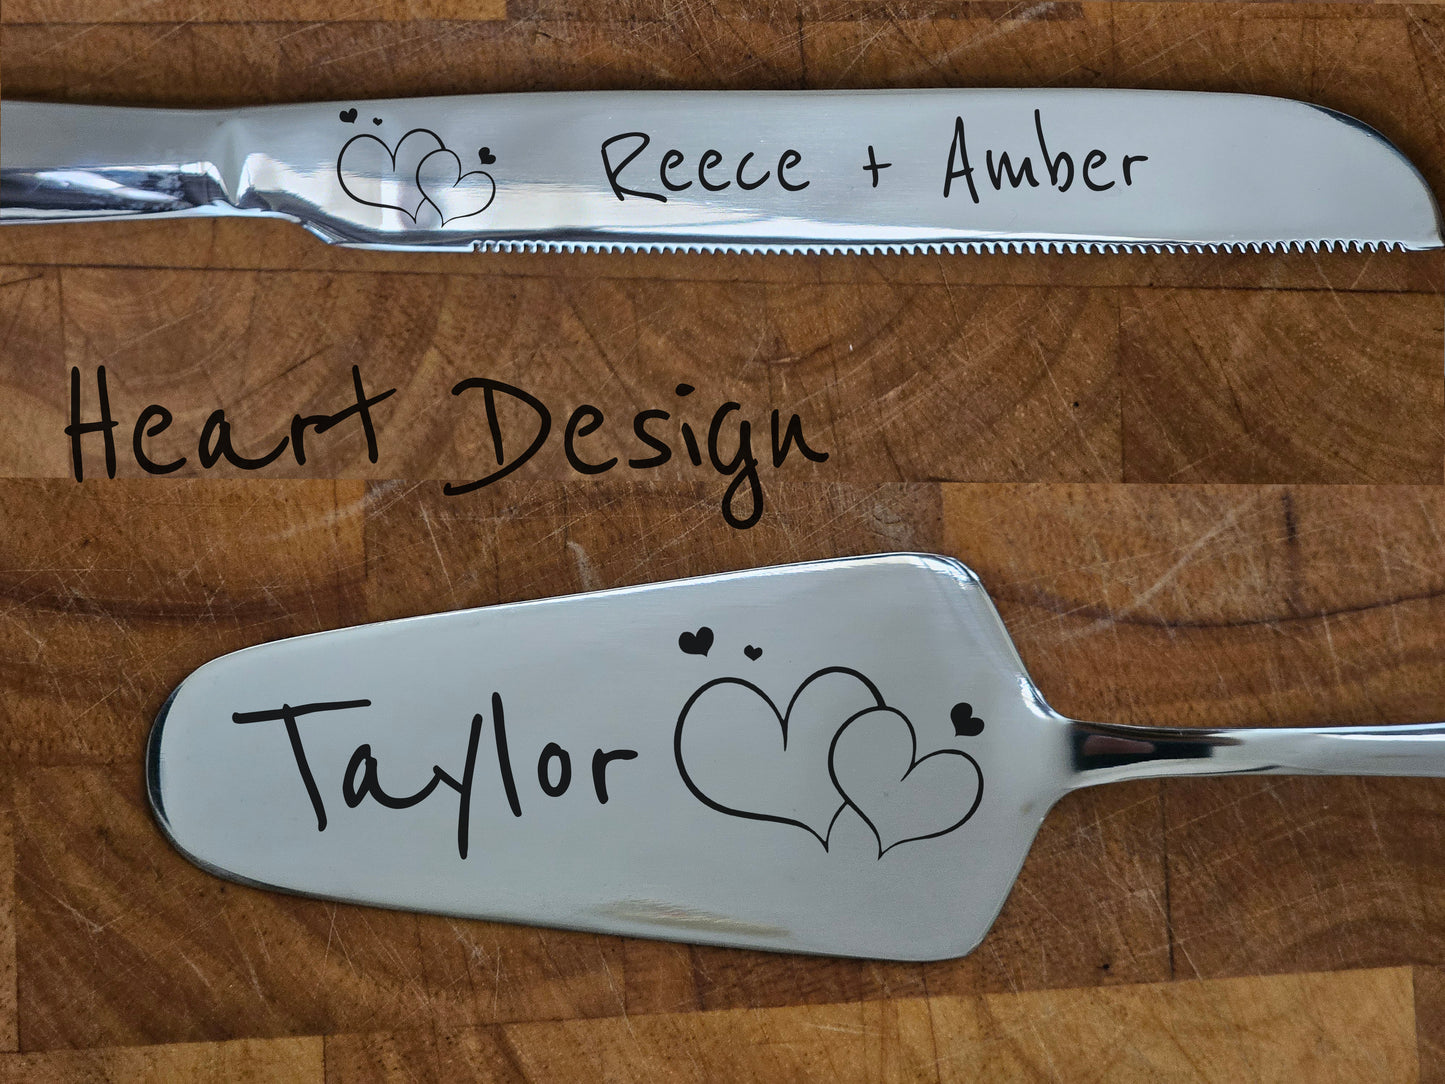 Wedding Cake Knife and Server Set with Personalised Engraving